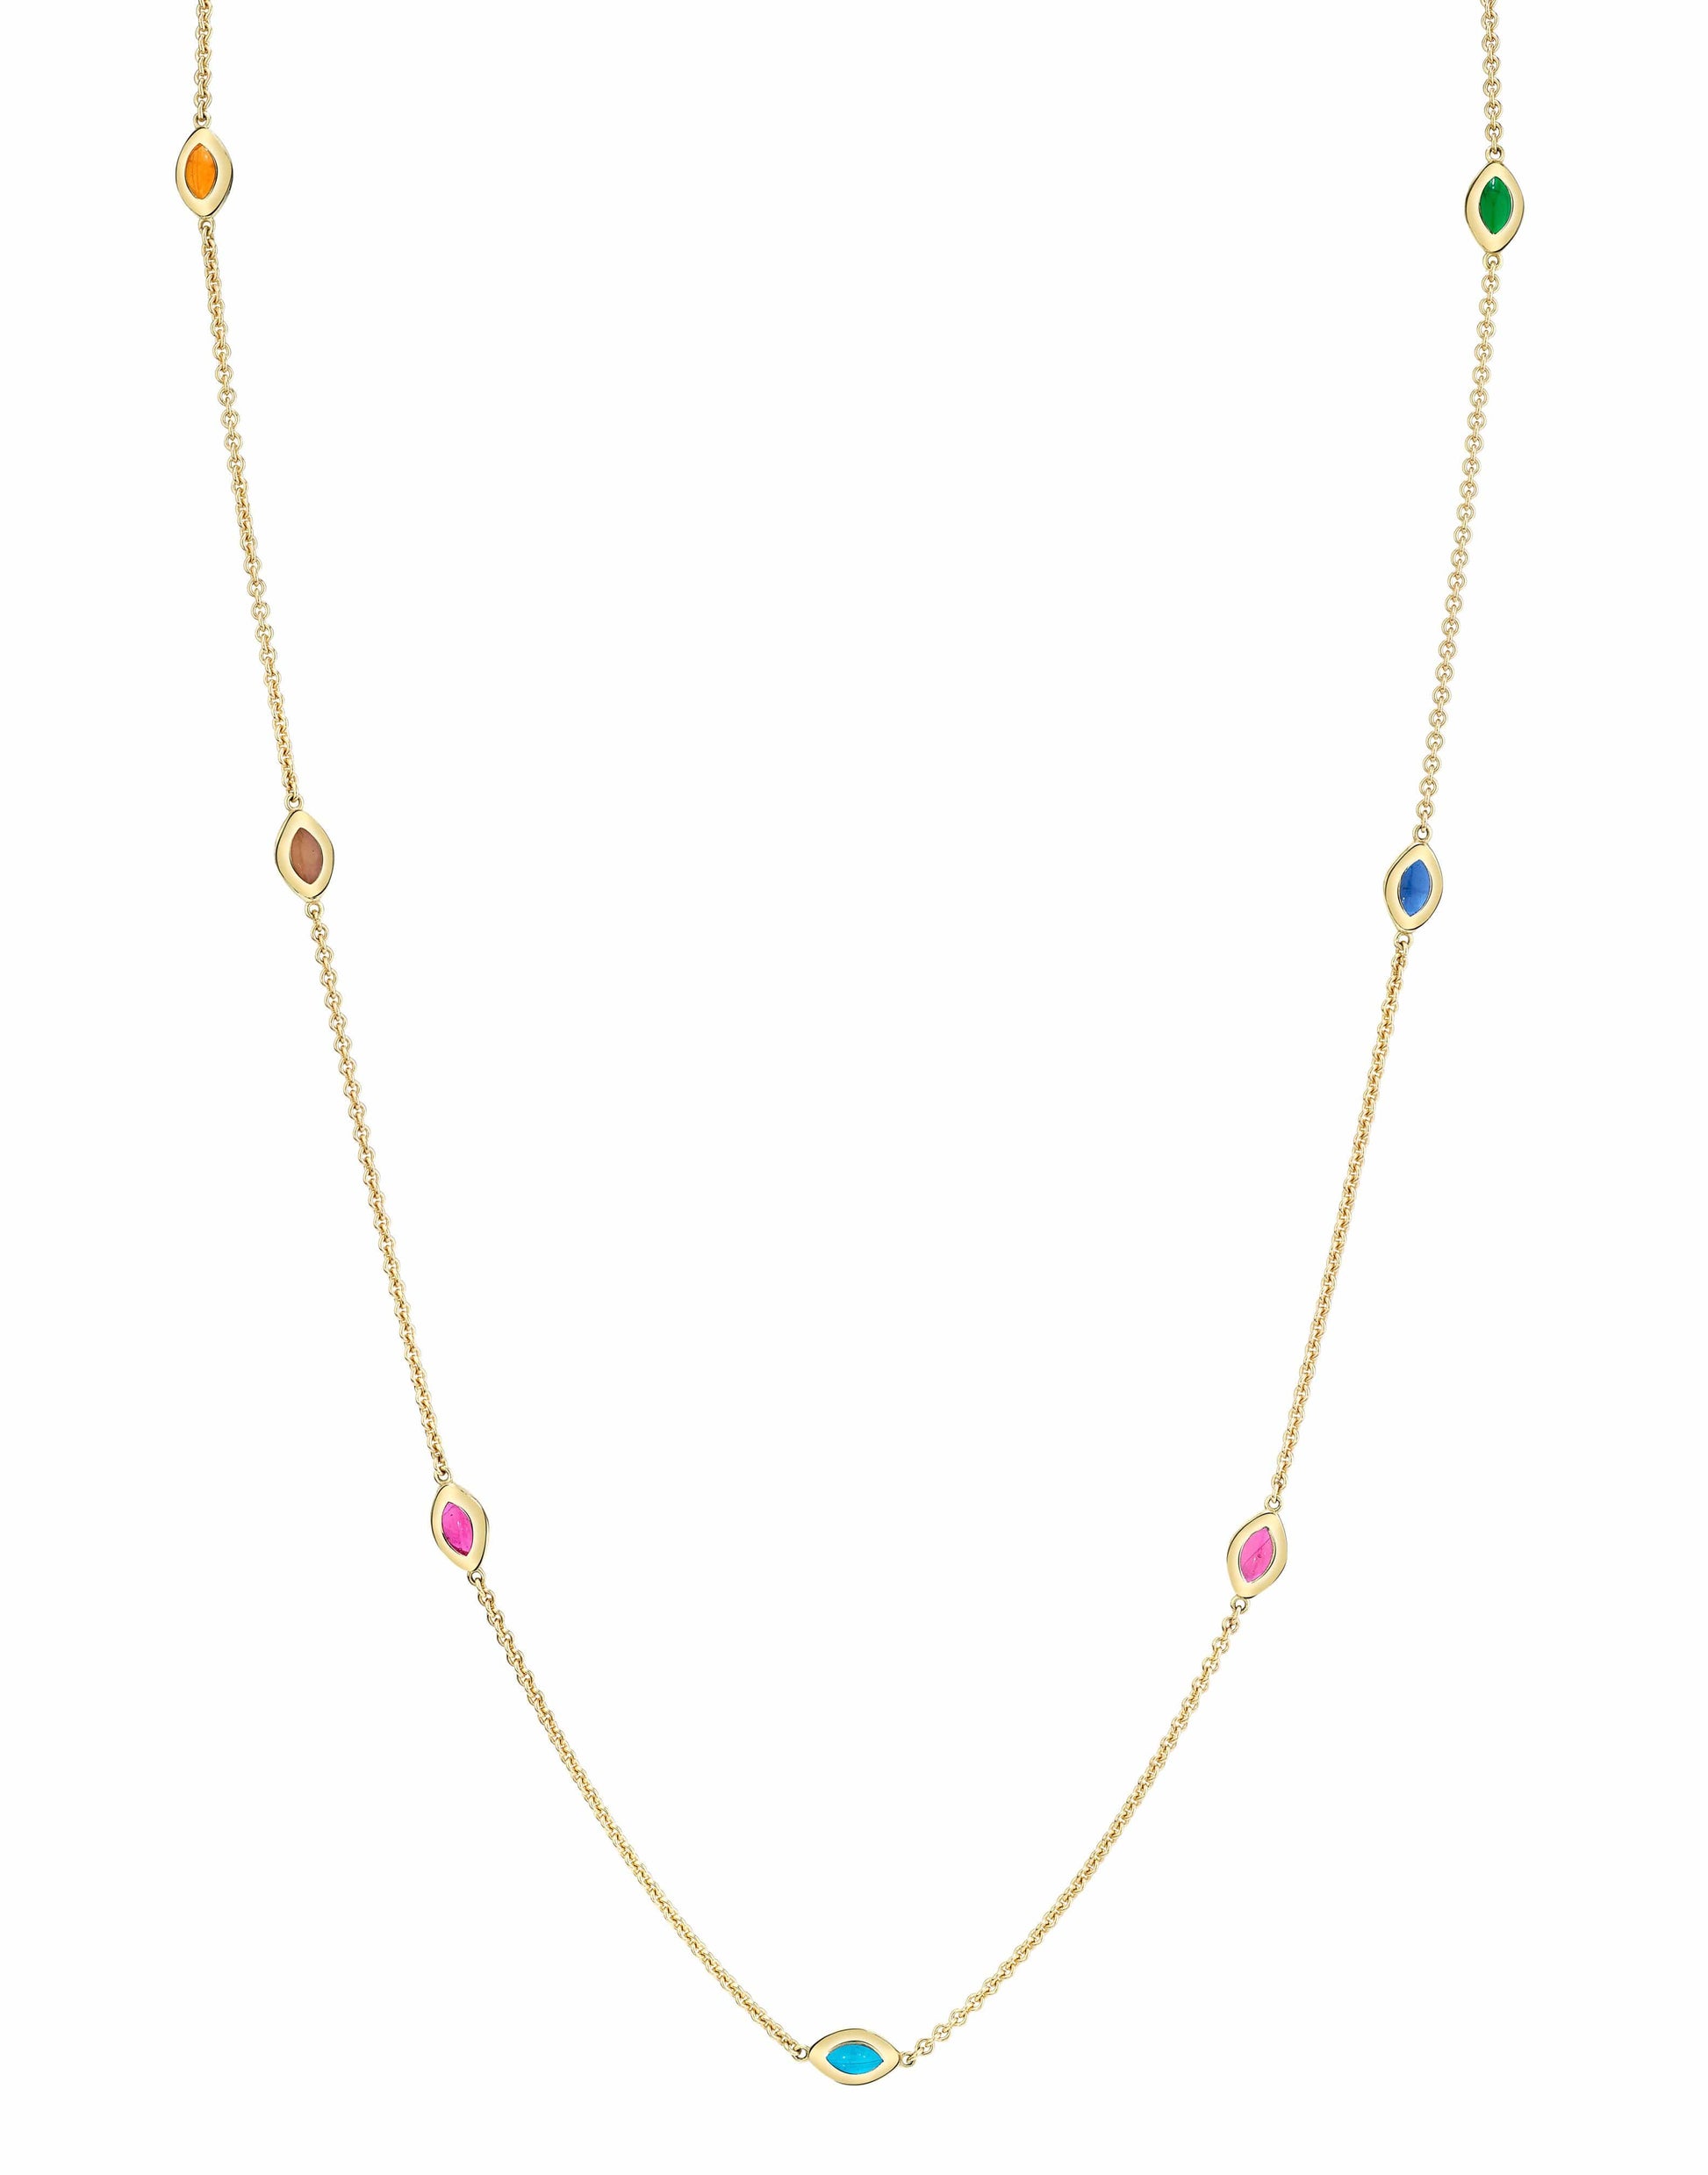 ANDY LIF-Cat Eye Link Necklace 7 Colors-YELLOW GOLD